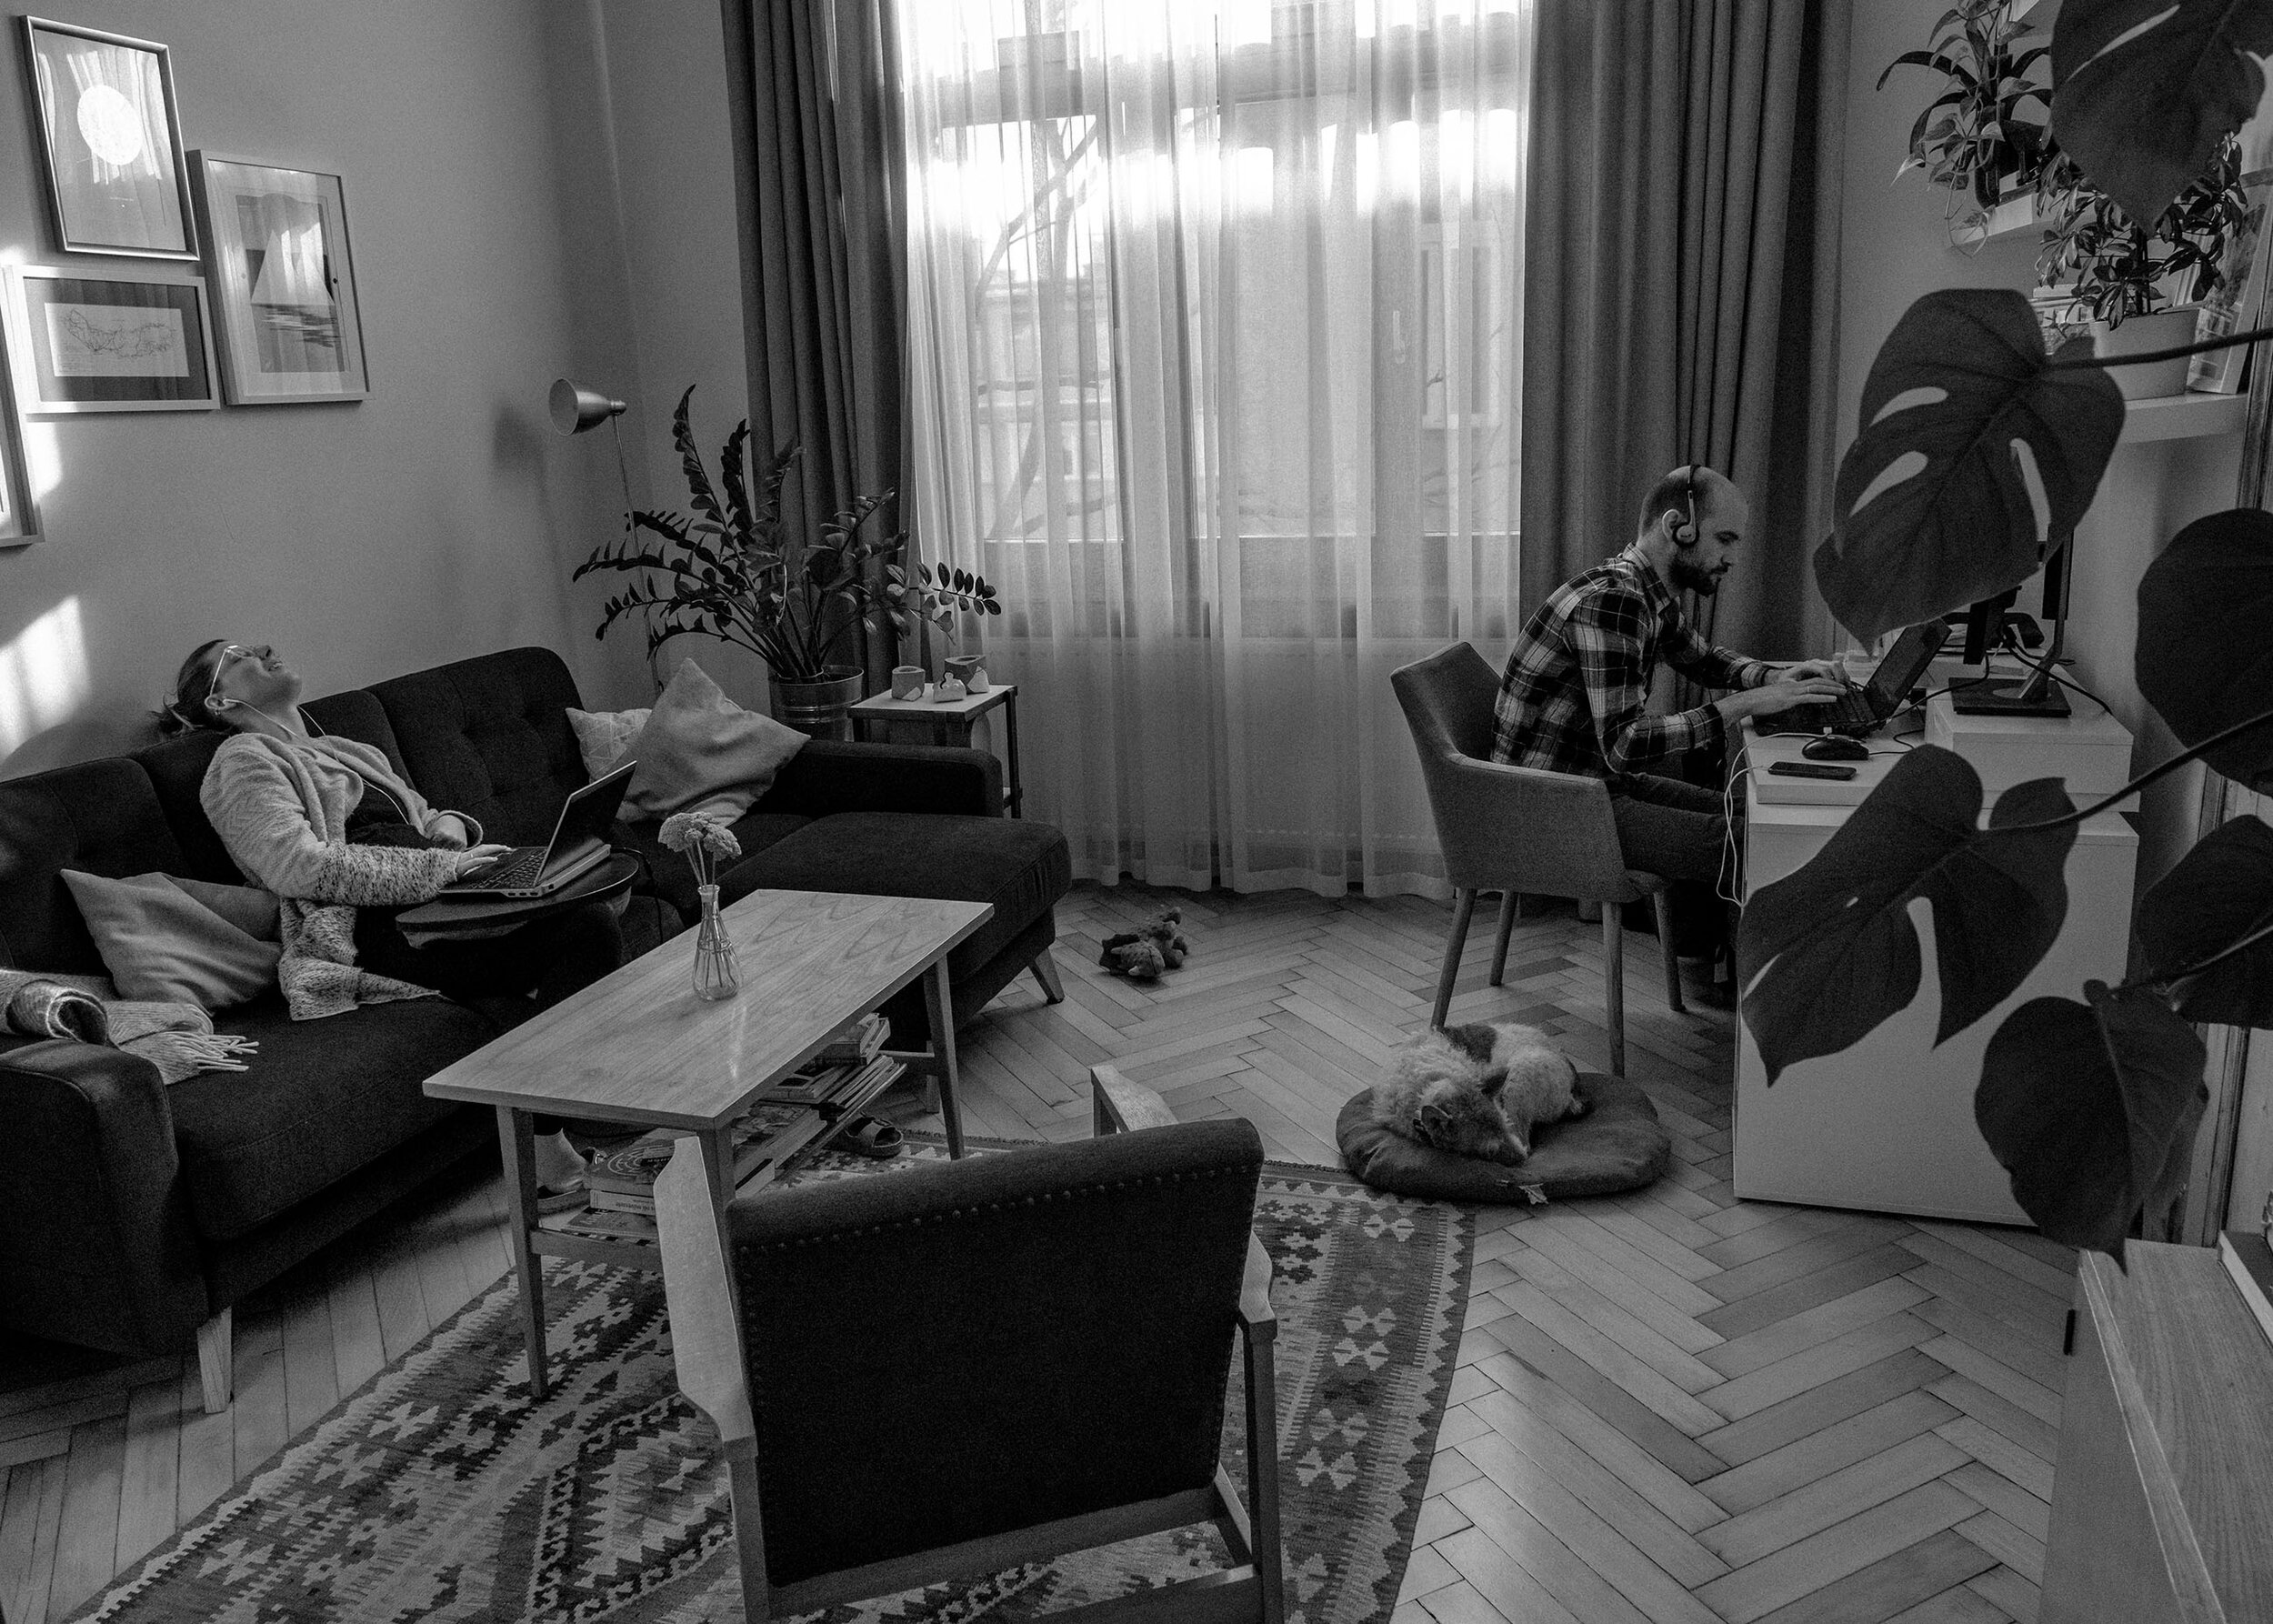   Réka  and  Jocó  try to separate each other’s noise with headphones during the daytime in their newly renovated flat. Réka spends her last days with her students and organises timetables online before giving birth to their first child. As her deliv